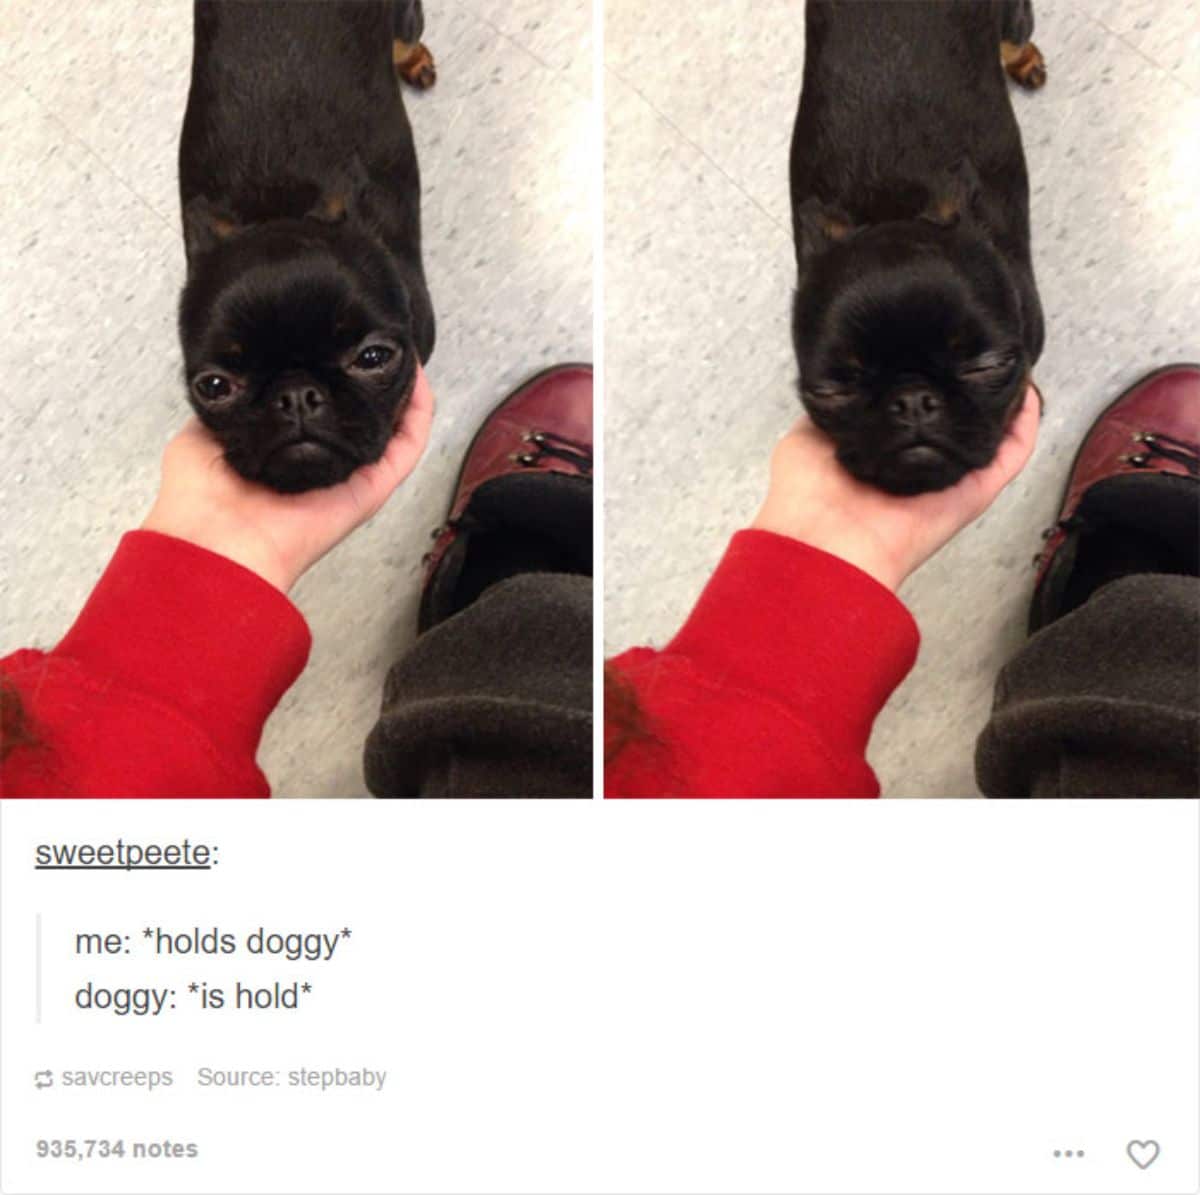 tumblr post of black puppy's face held in someone's hand with caption saying they hold doggy and doggy is hold